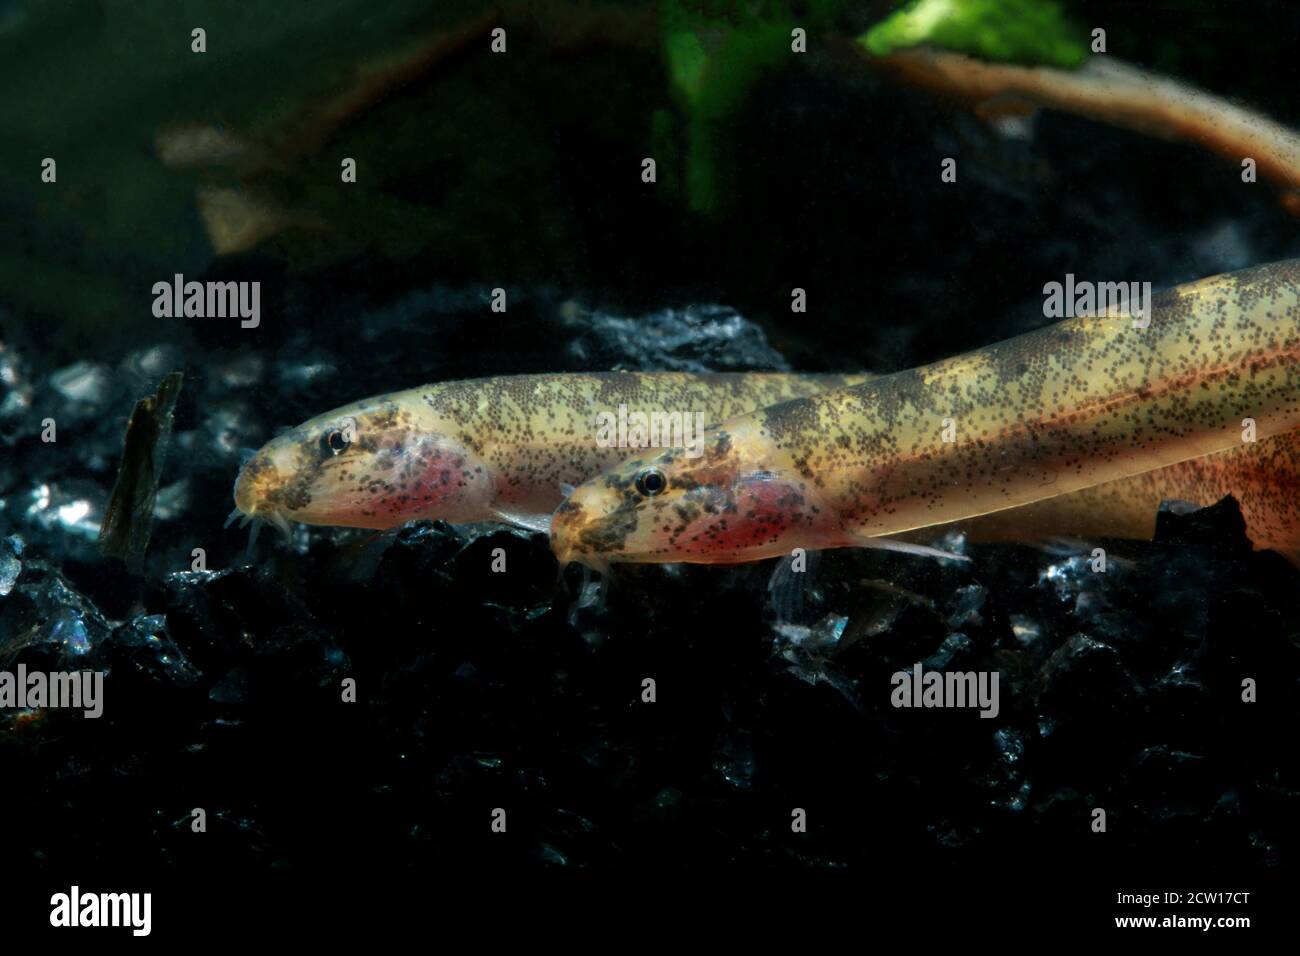 Pangio piperata is a species of pangio fish found in Malay Peninsula. Stock Photo